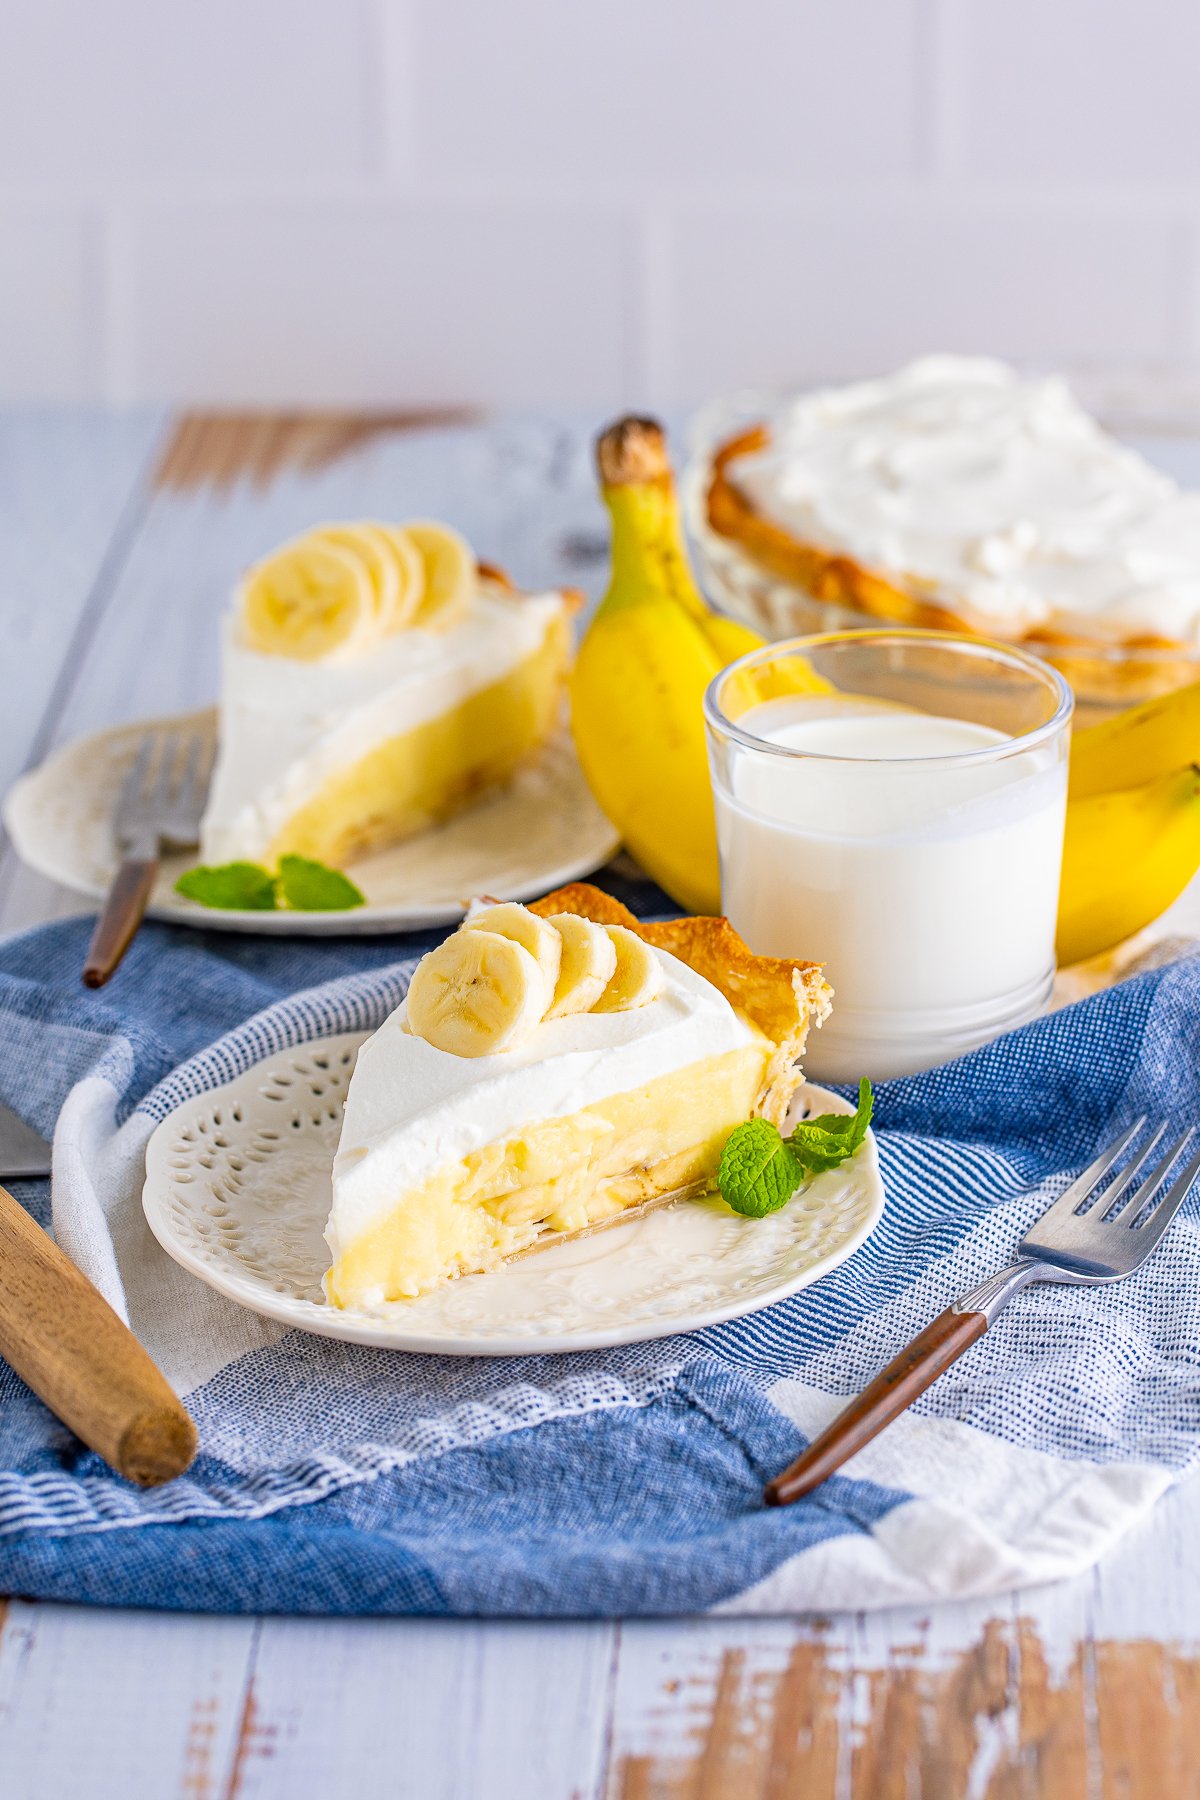 Two slices of Banana Cream Pie on white plates topped with banana slices.